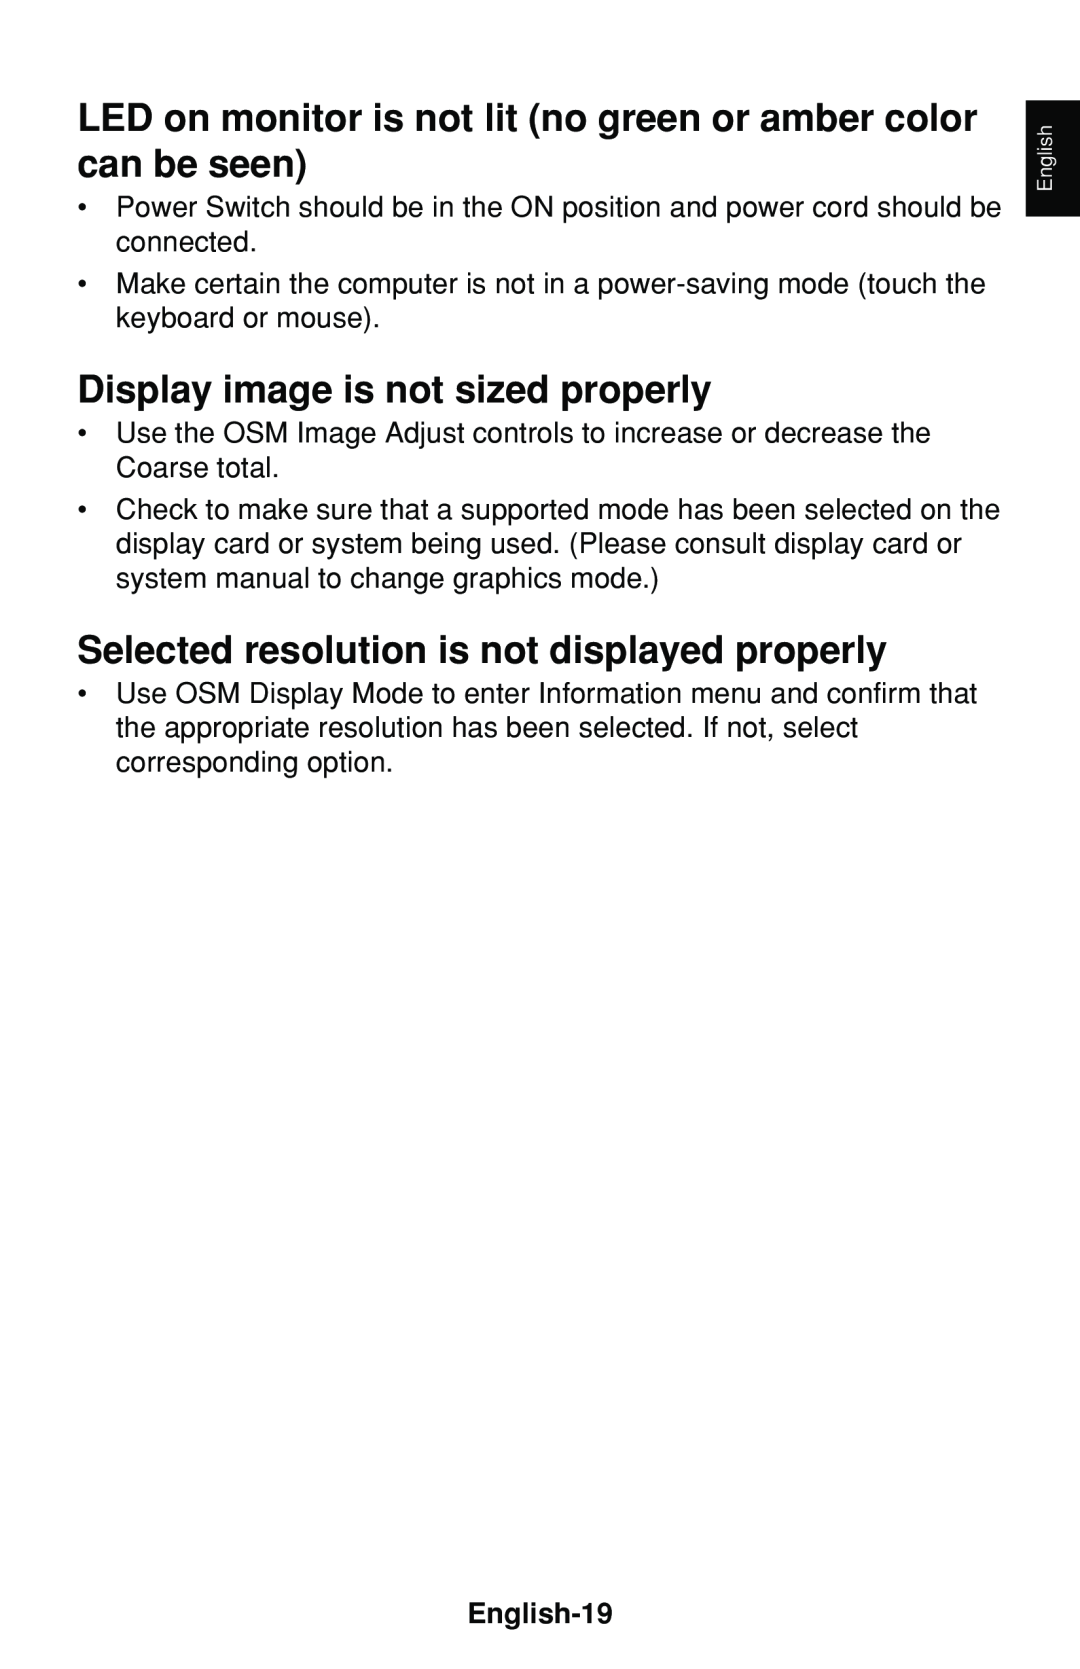 NEC LCD1530V user manual Display image is not sized properly, Selected resolution is not displayed properly, English-19 